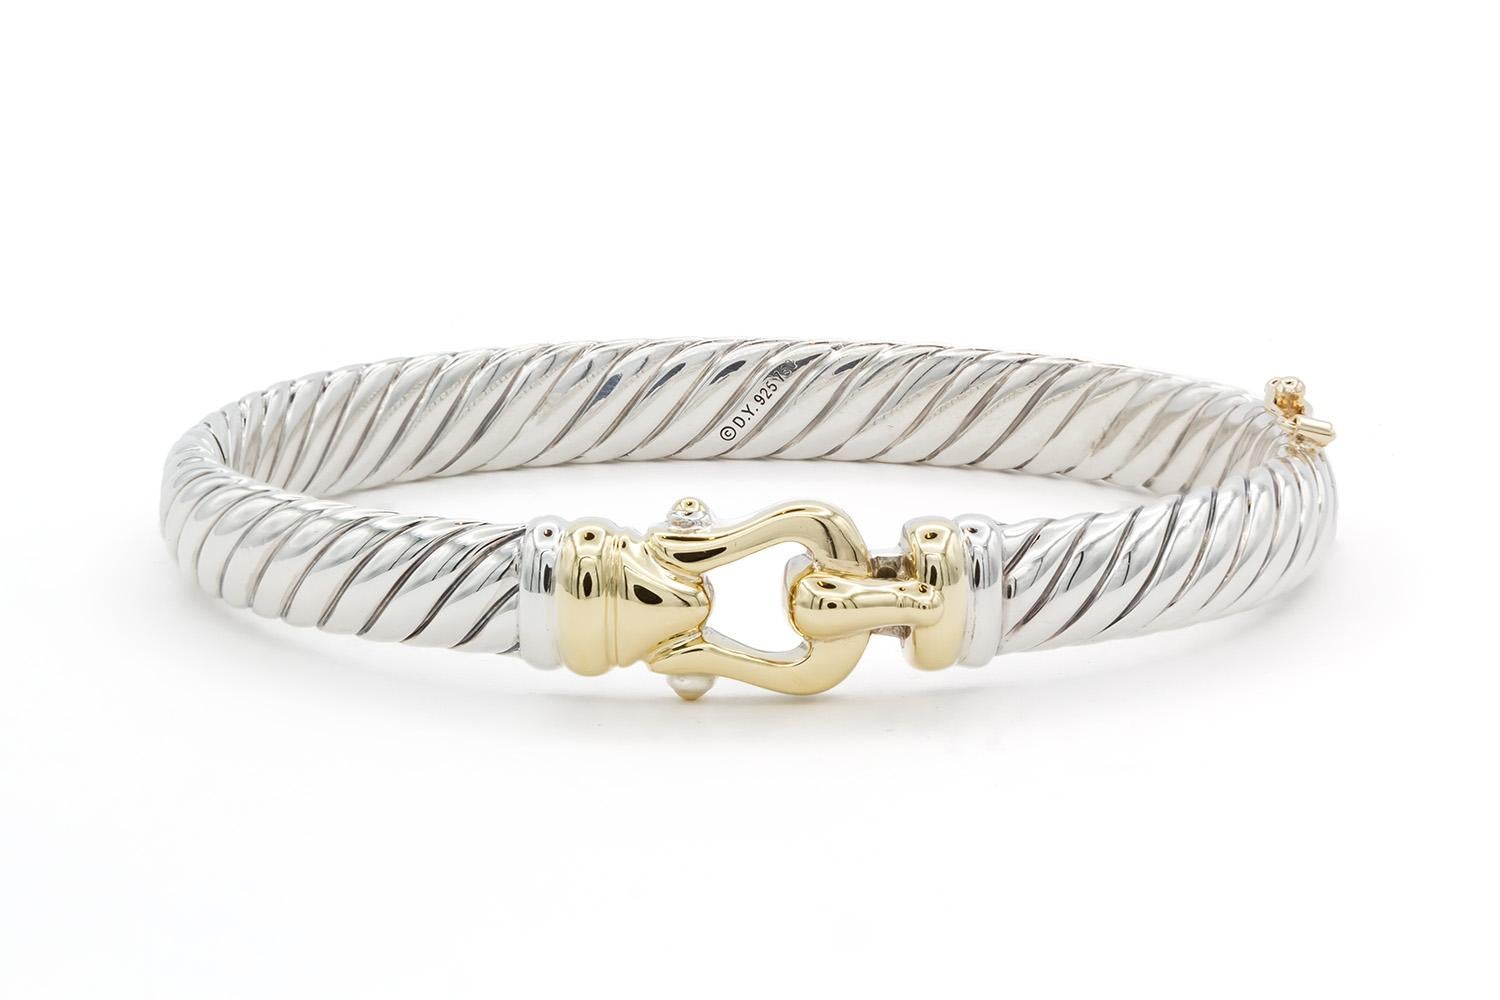 We arepleased to offer this David Yurman Two Tone Hinged Buckle Bracelet Bangle. This bracelet features David Yurmans classic cable design and is fashioned from sterling silver & 18k yellow gold. The bracelet measures 7mm wide and will fit up to a